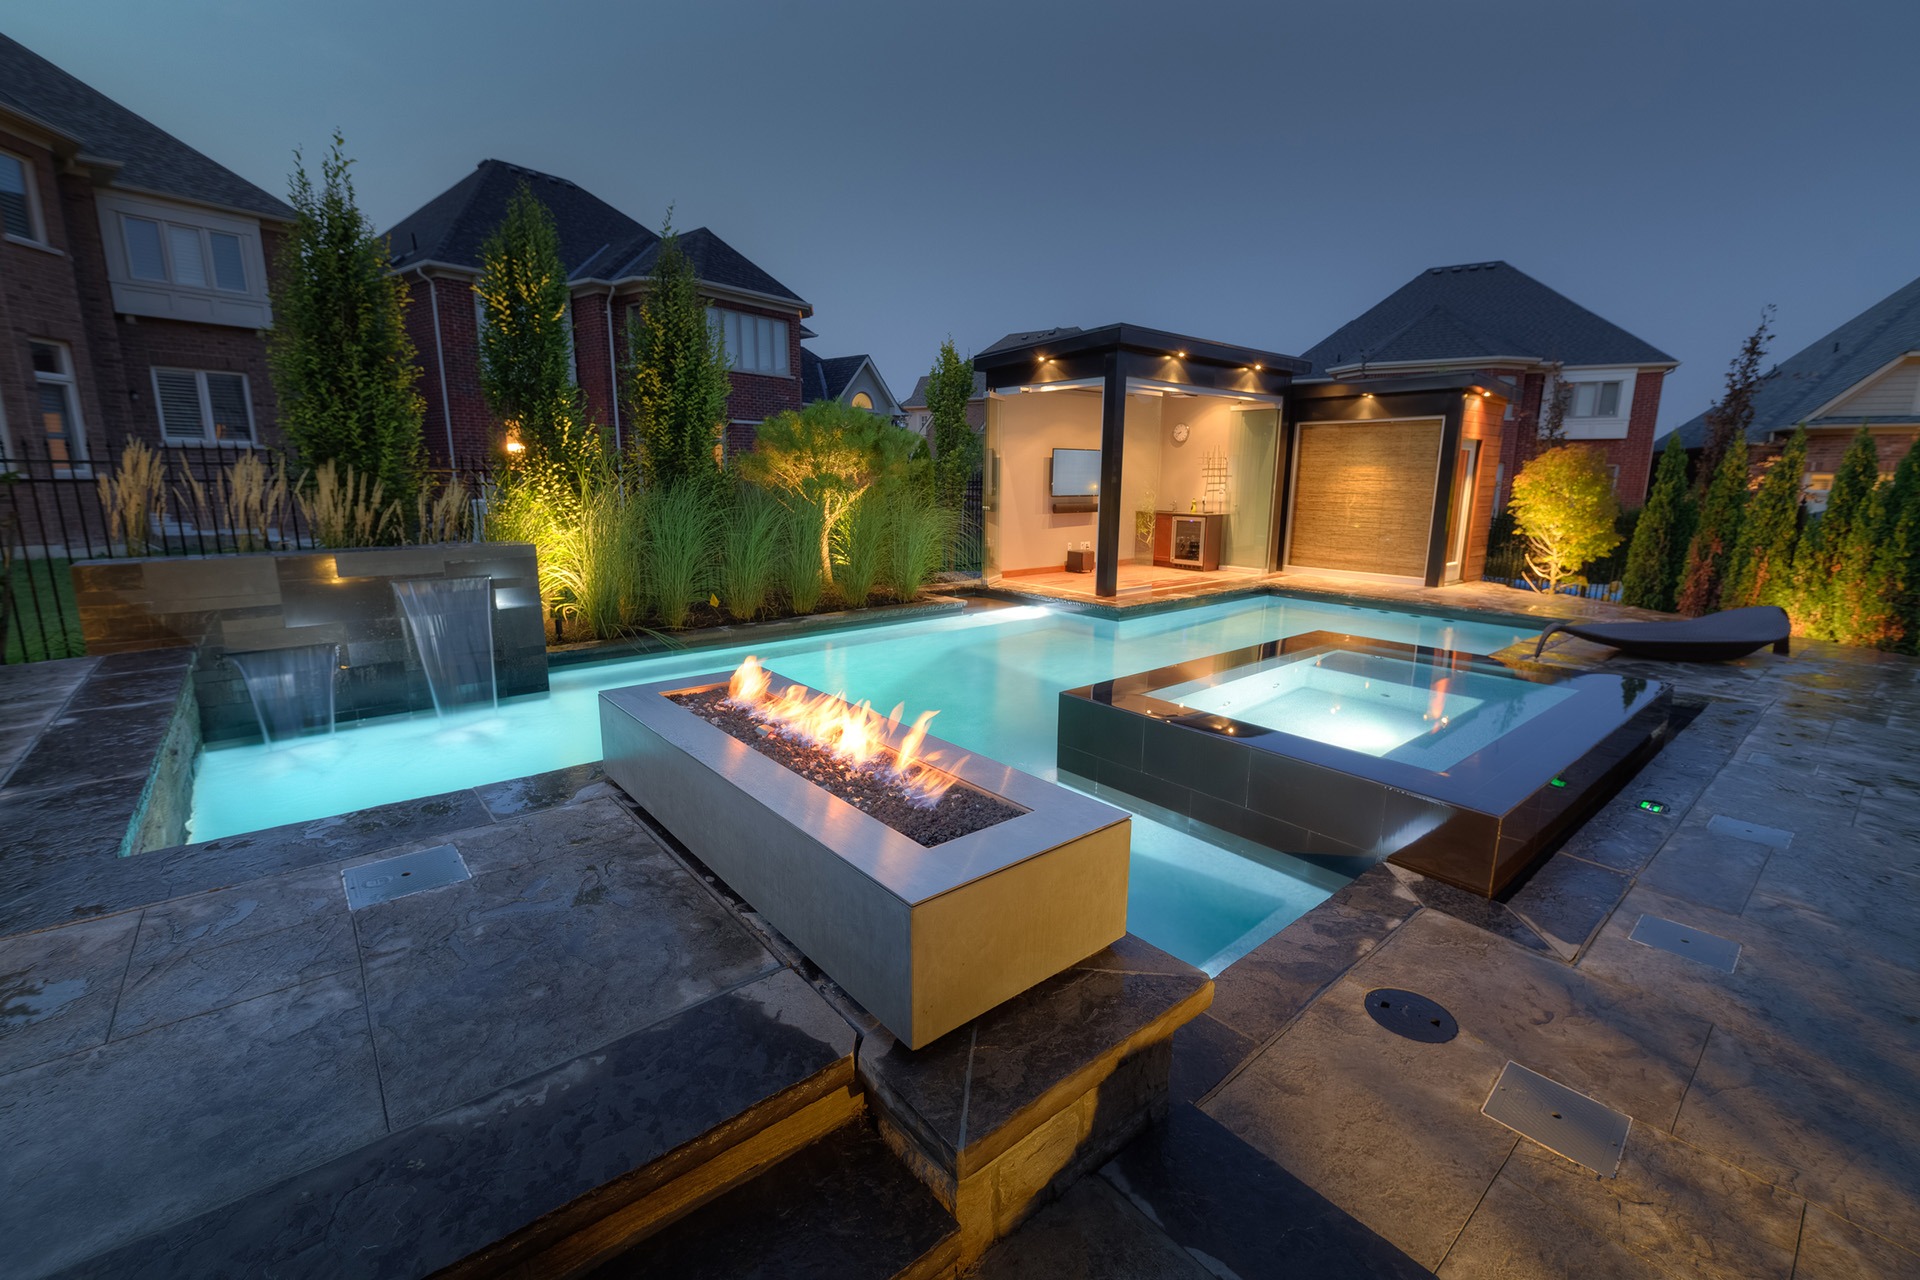 Luxurious backyard at dusk featuring a swimming pool with waterfall, a hot tub, a lit fire feature, landscaped garden, and a modern pool house.